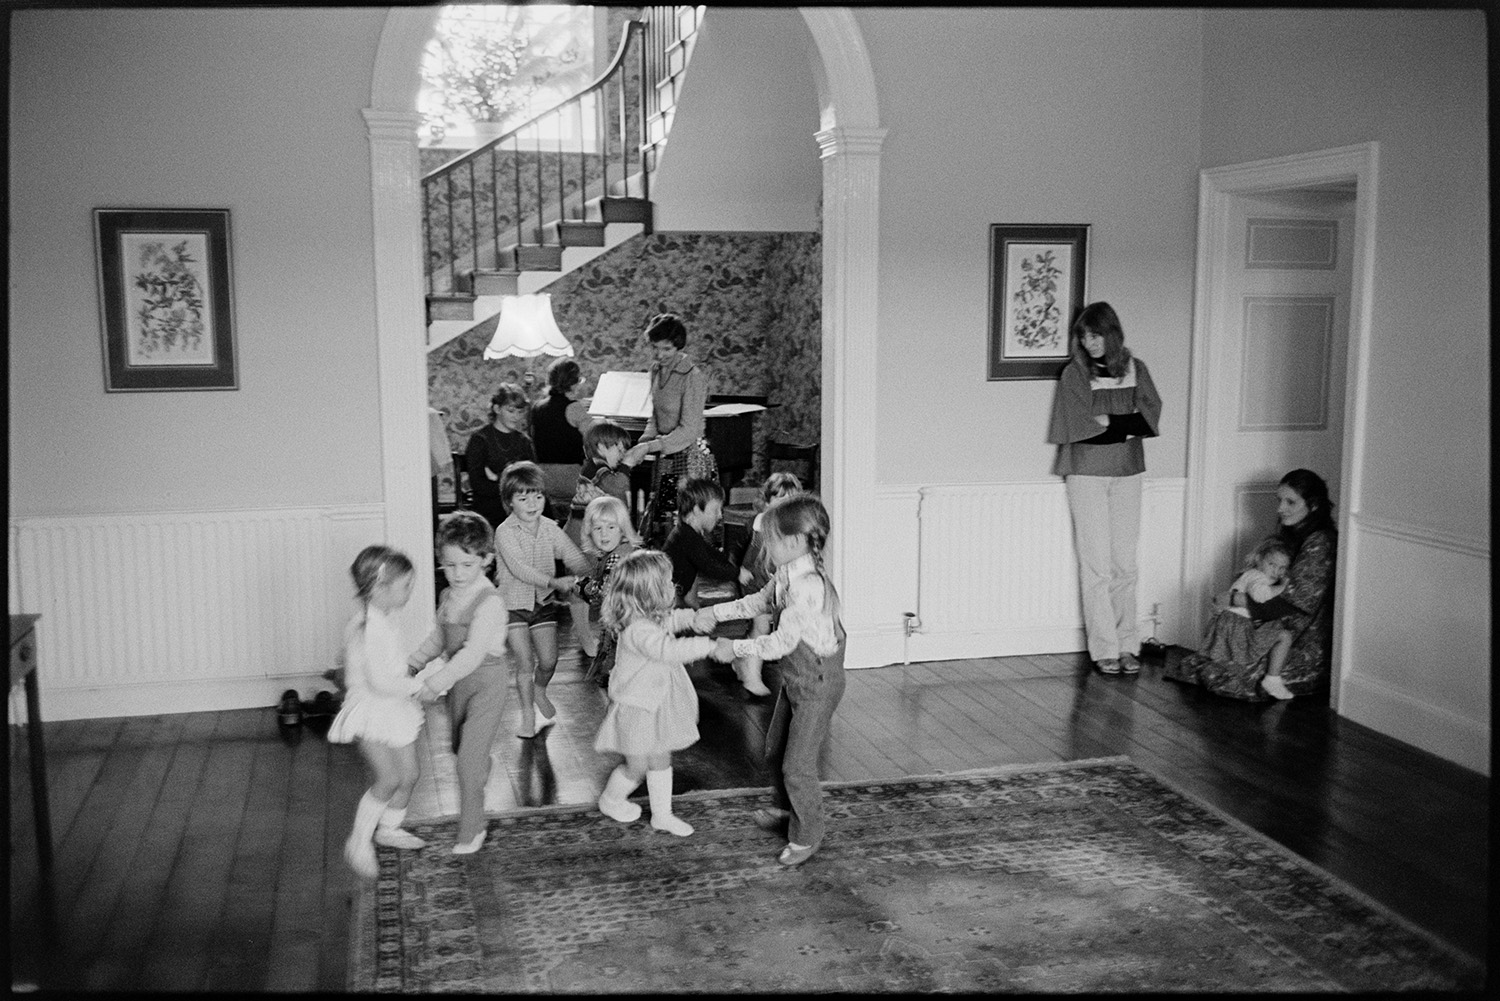 Children's dance class in large country house.
[Young children dancing at Marwood House by an archway, with women watching. Another woman is playing a piano in the background. A staircase can be seen through the archway.]